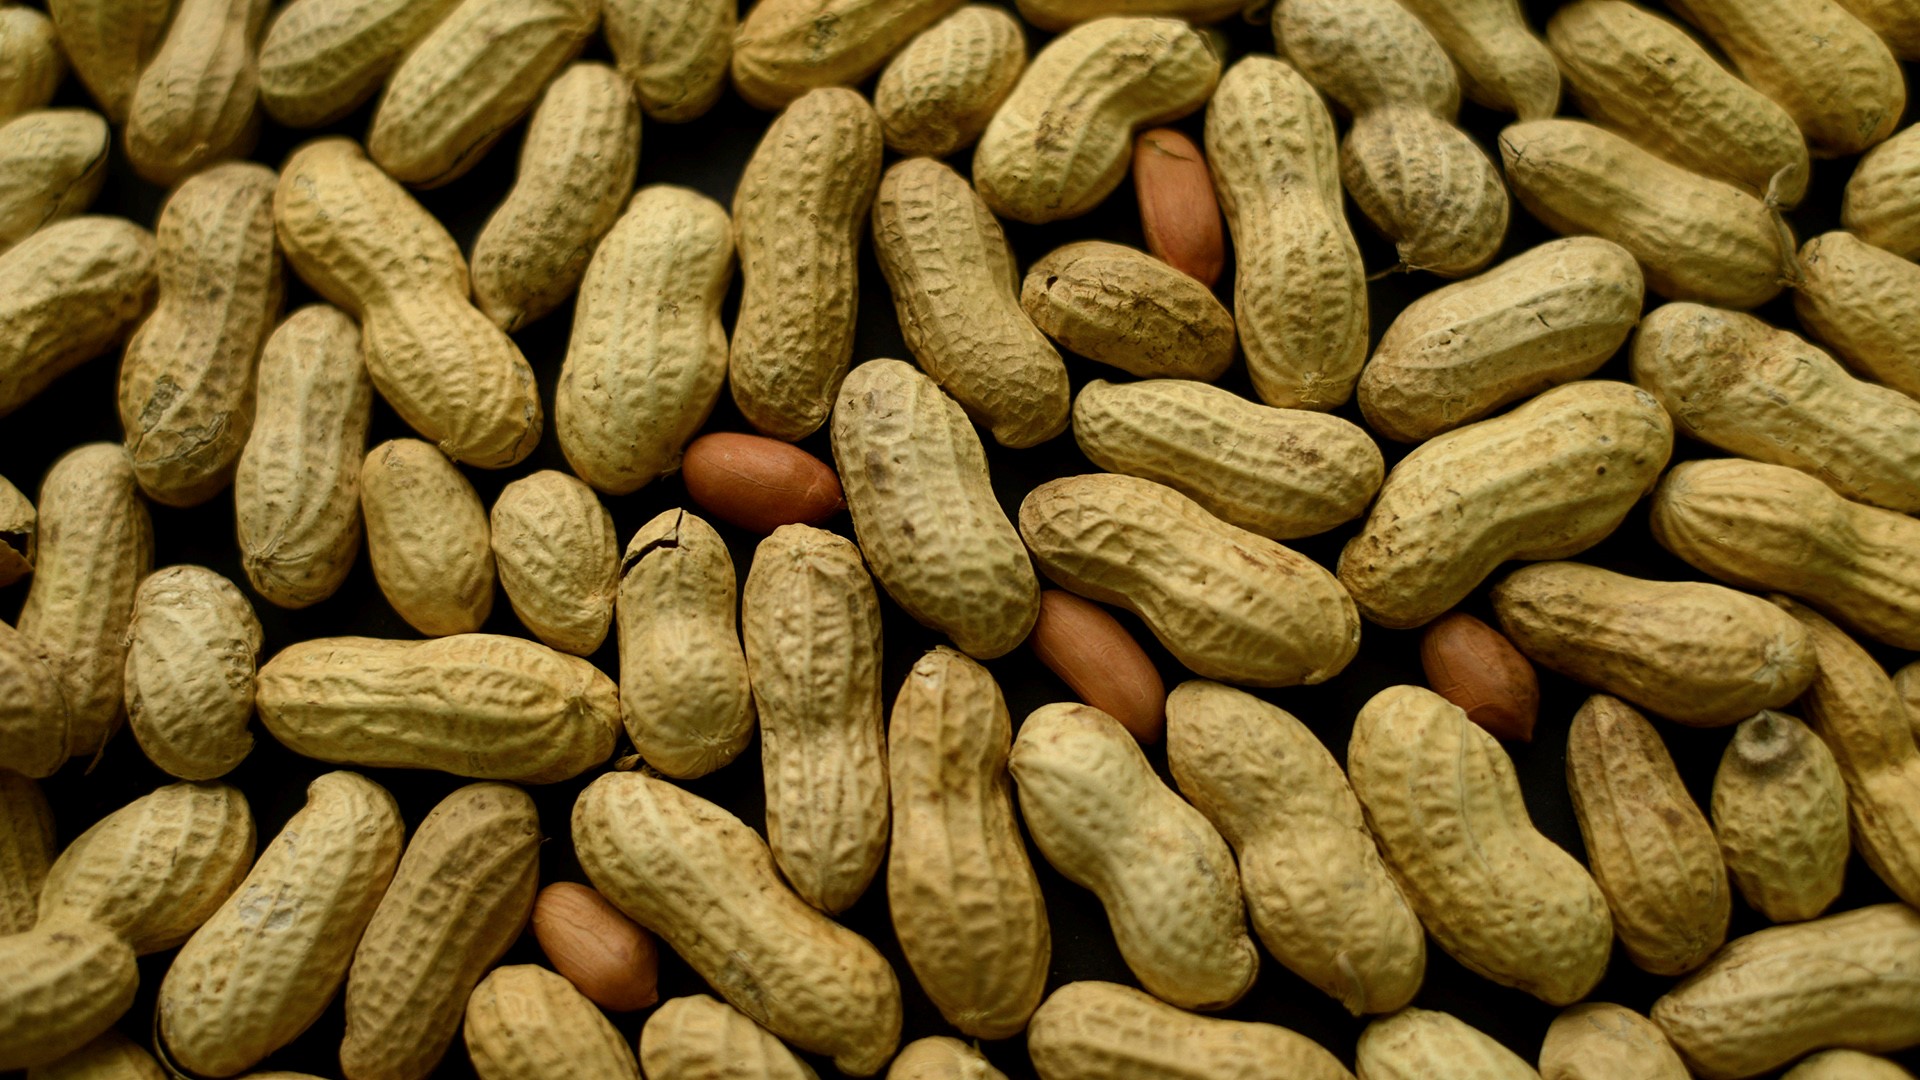 A new study is offering evidence that some toddlers might be able to overcome their peanut allergies if treated at a very young age.